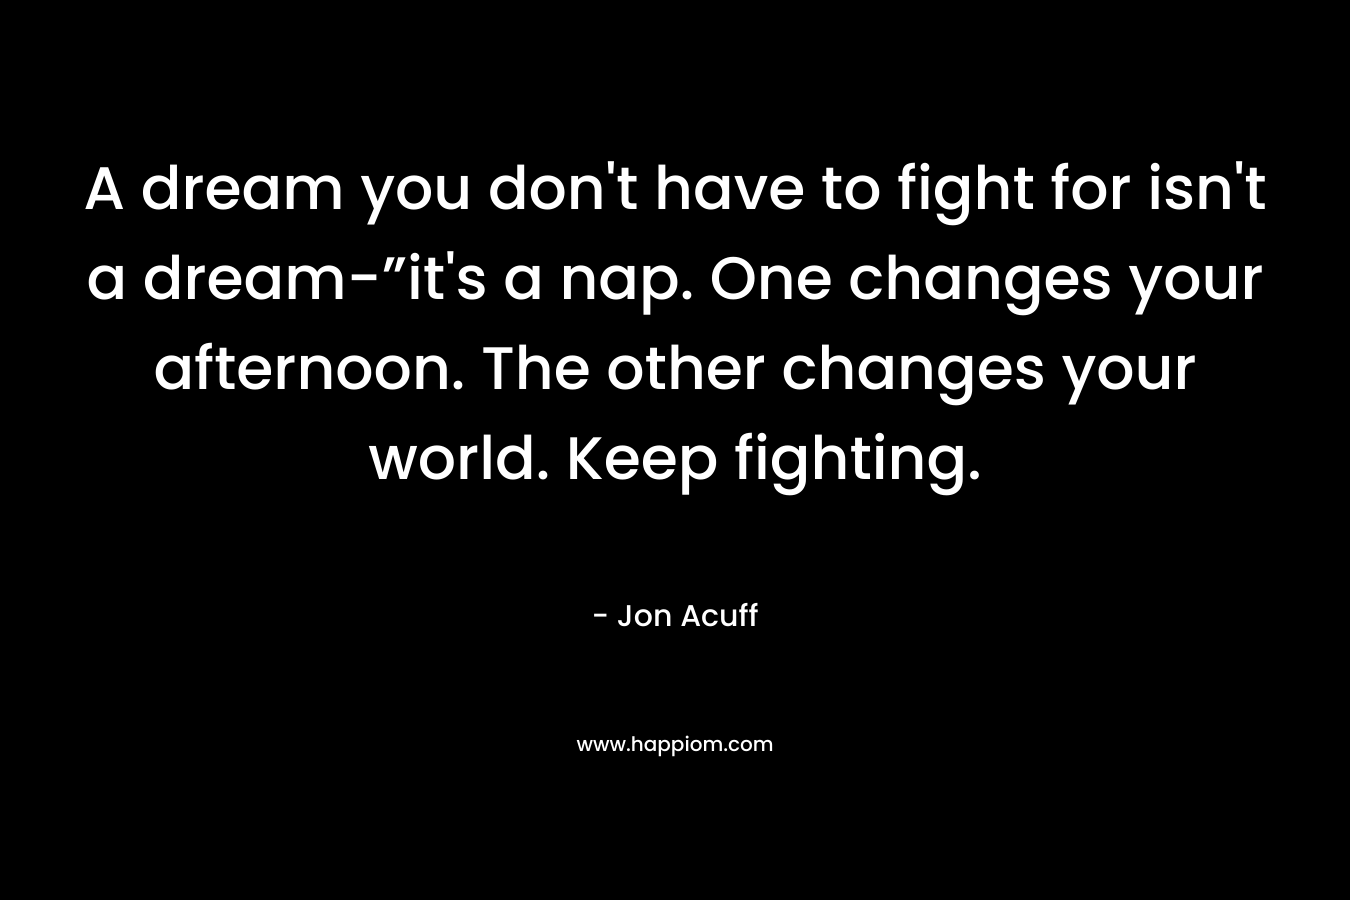 A dream you don't have to fight for isn't a dream-”it's a nap. One changes your afternoon. The other changes your world. Keep fighting.